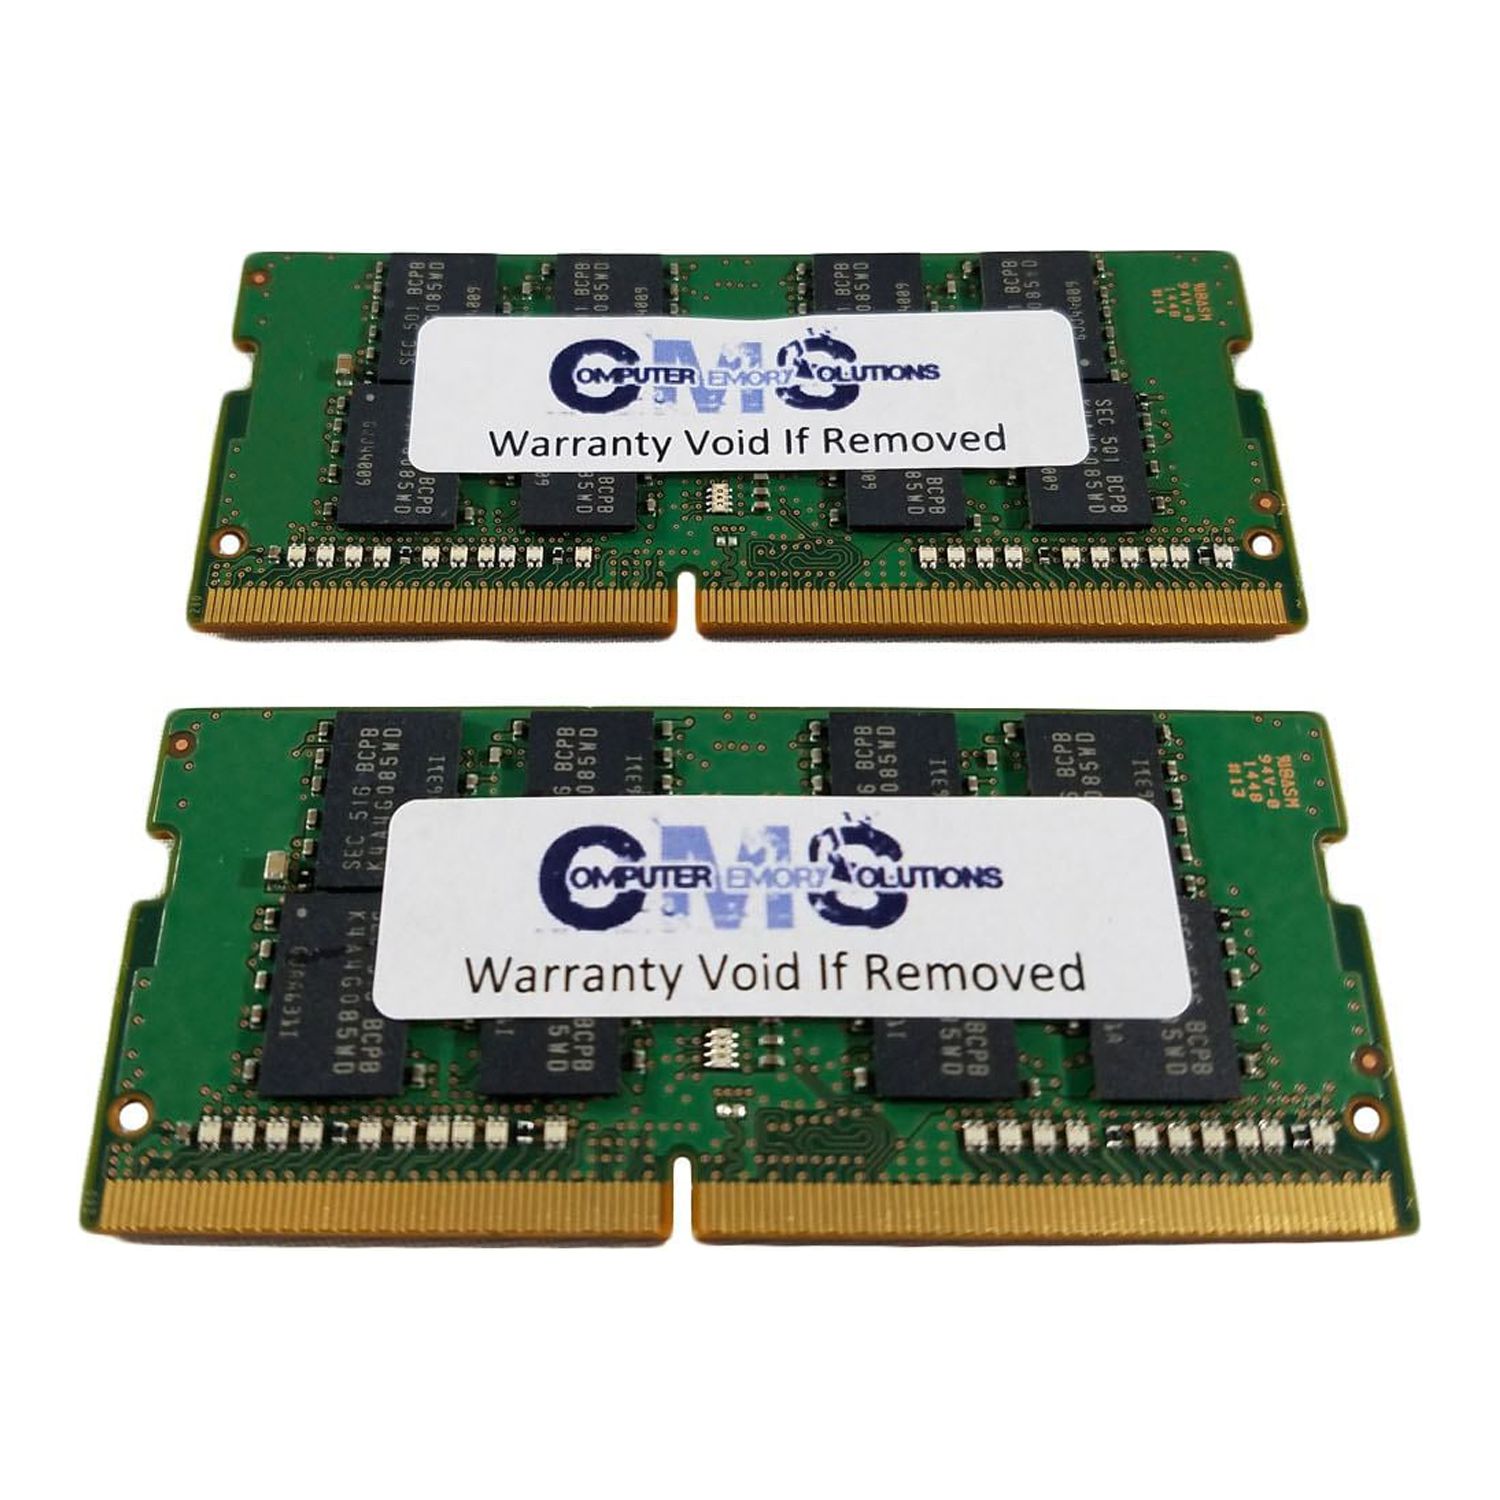 CMS 16GB (2X8GB) DDR4 19200 2400MHZ NON ECC SODIMM Memory Ram Upgrade Compatible with Gigabyte® Mini STX System BRIX BRIX GB-BKi5T-7200, GB-BKi7HA-7500, GB-BKi7HT-7500, GB-BKi7T-7500 - C109 - image 2 of 2